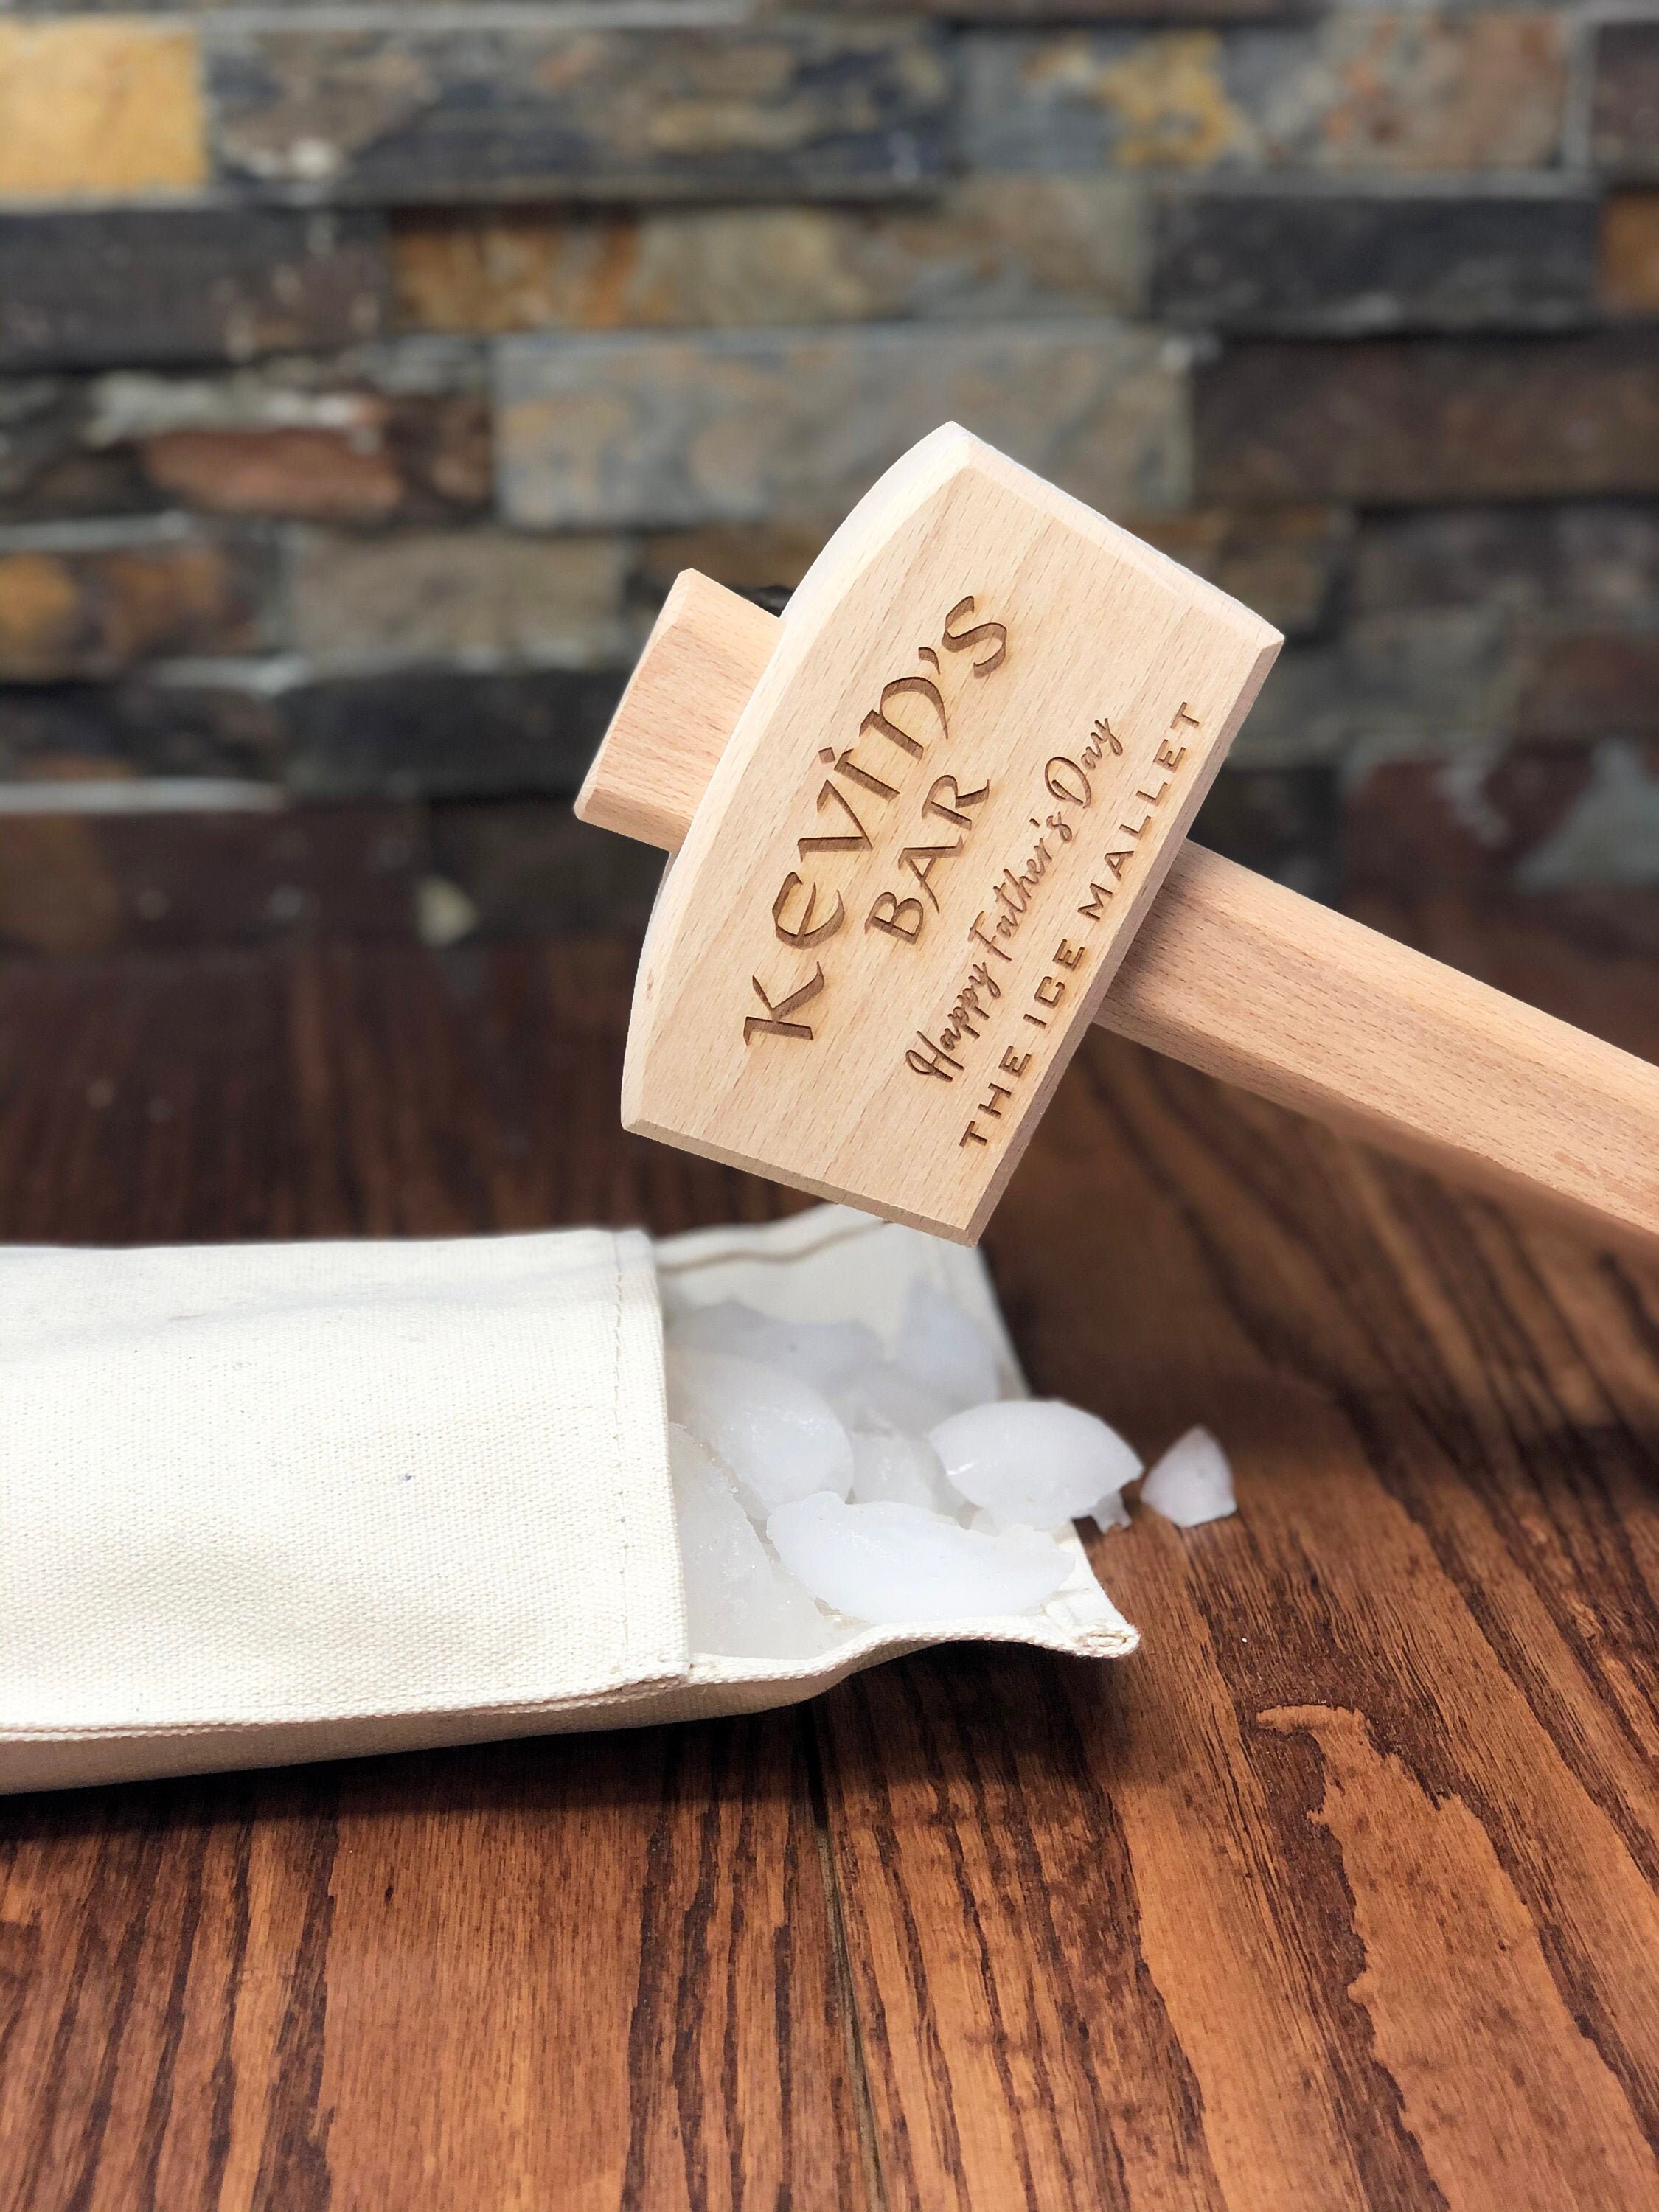 Eparé Ice Mallet And Lewis Bag - Ice Crushing Wood Hammer And Bar Bag -  Small Wooden Ice Crusher - Professional Bartender And Kitchen Tool Kit 